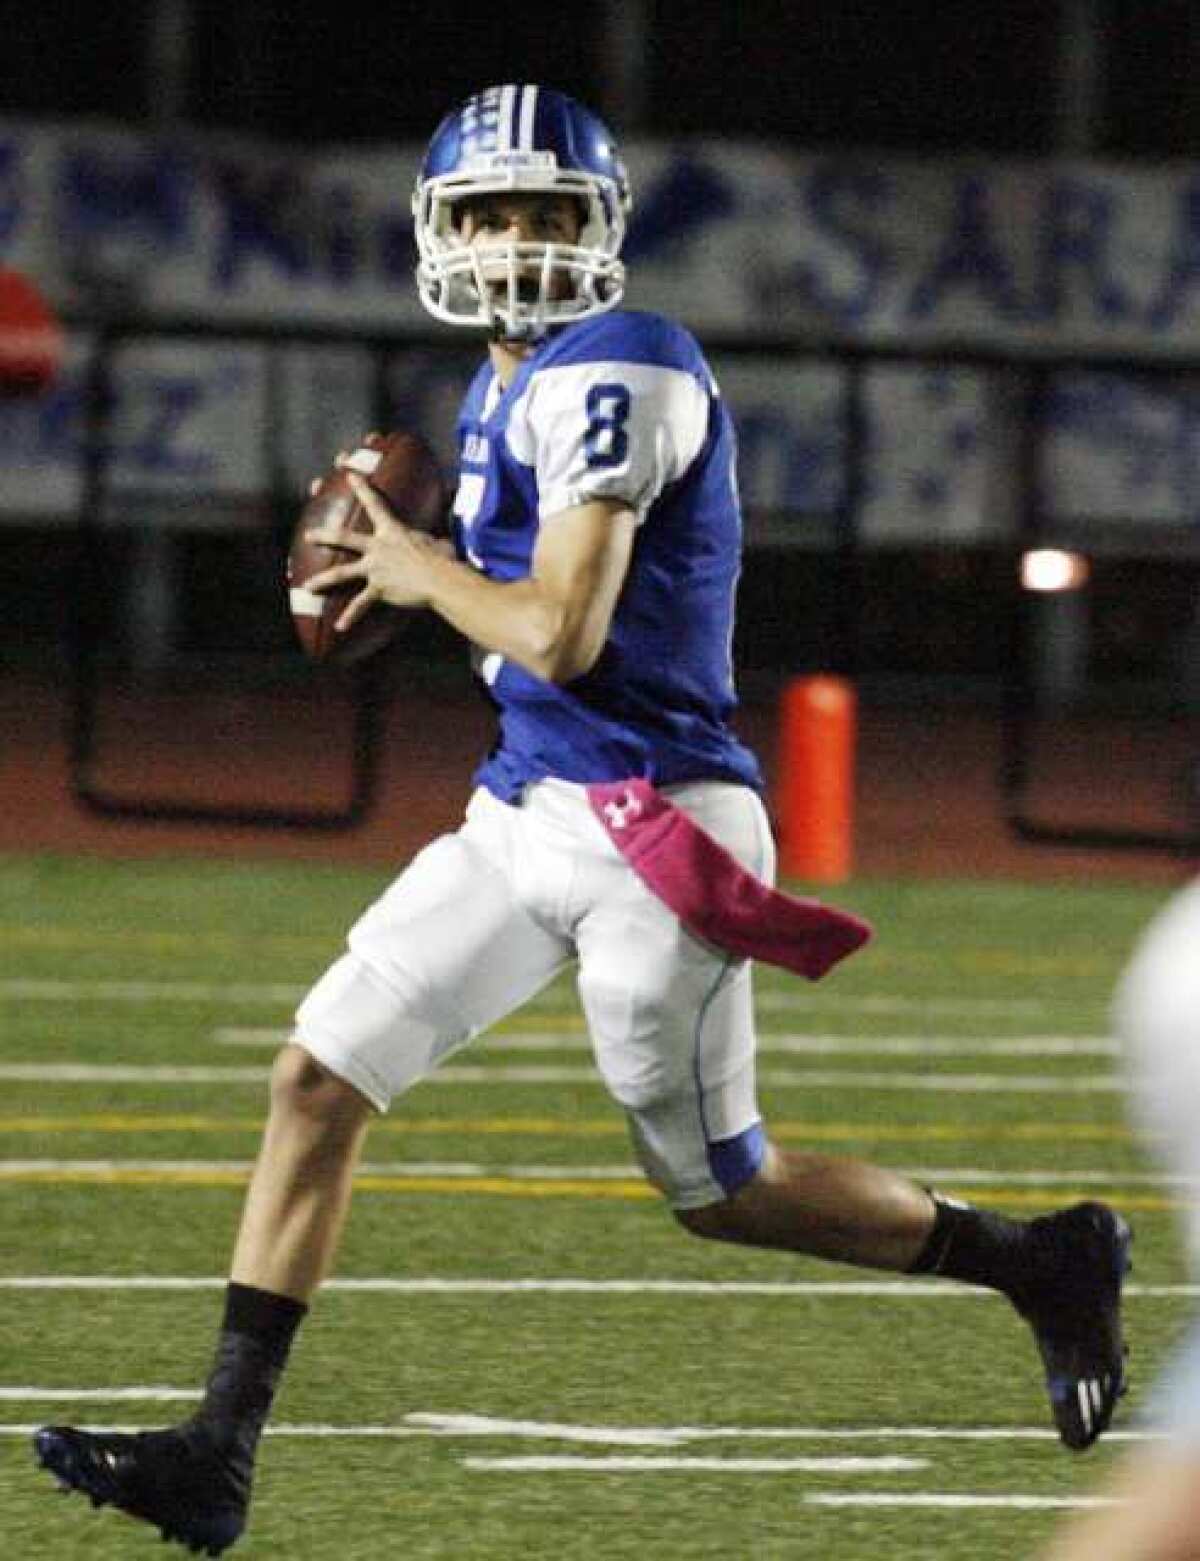 Burbank quarterback Ryan Meredith rolls out to pass against Crescenta Valley.